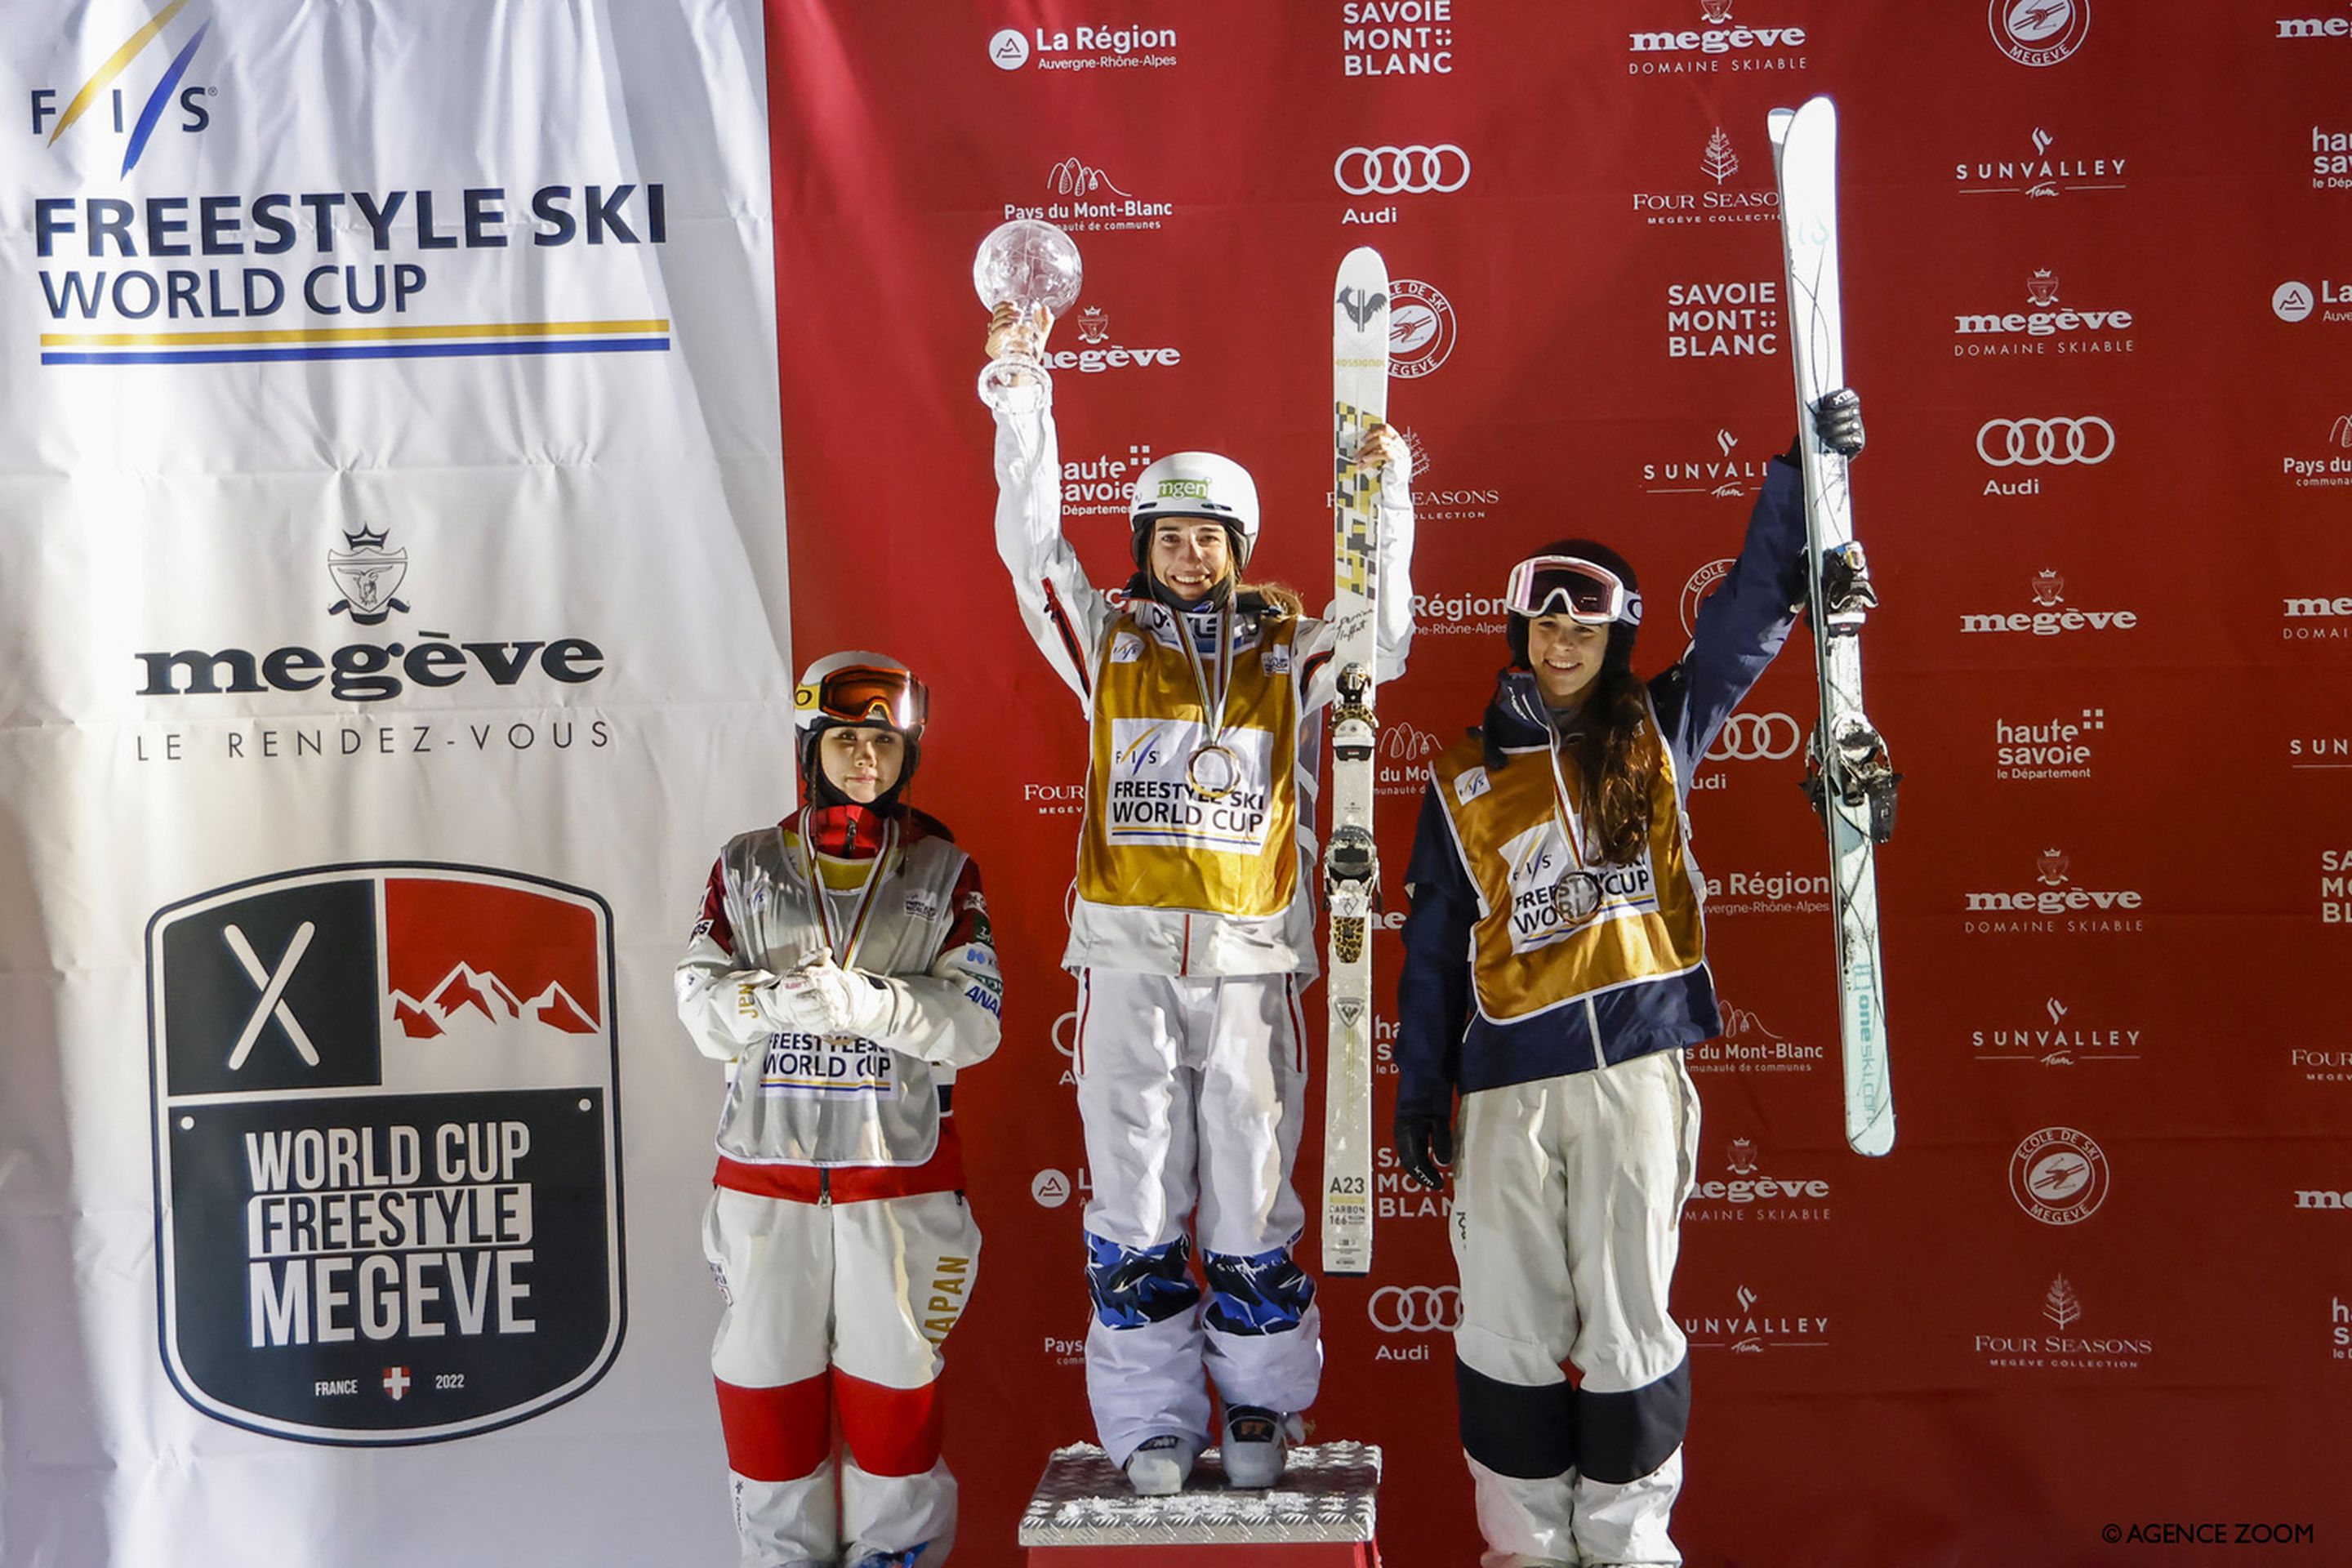 MEGEVE, FRANCE - MARCH 18: Perrine Laffont of Team France wins the globe in the moguls standings during the FIS Freestyle Ski World Cup Men's and Women's Moguls on March 18, 2022 in Megeve, France. (Photo by Alexis Boichard/Agence Zoom)